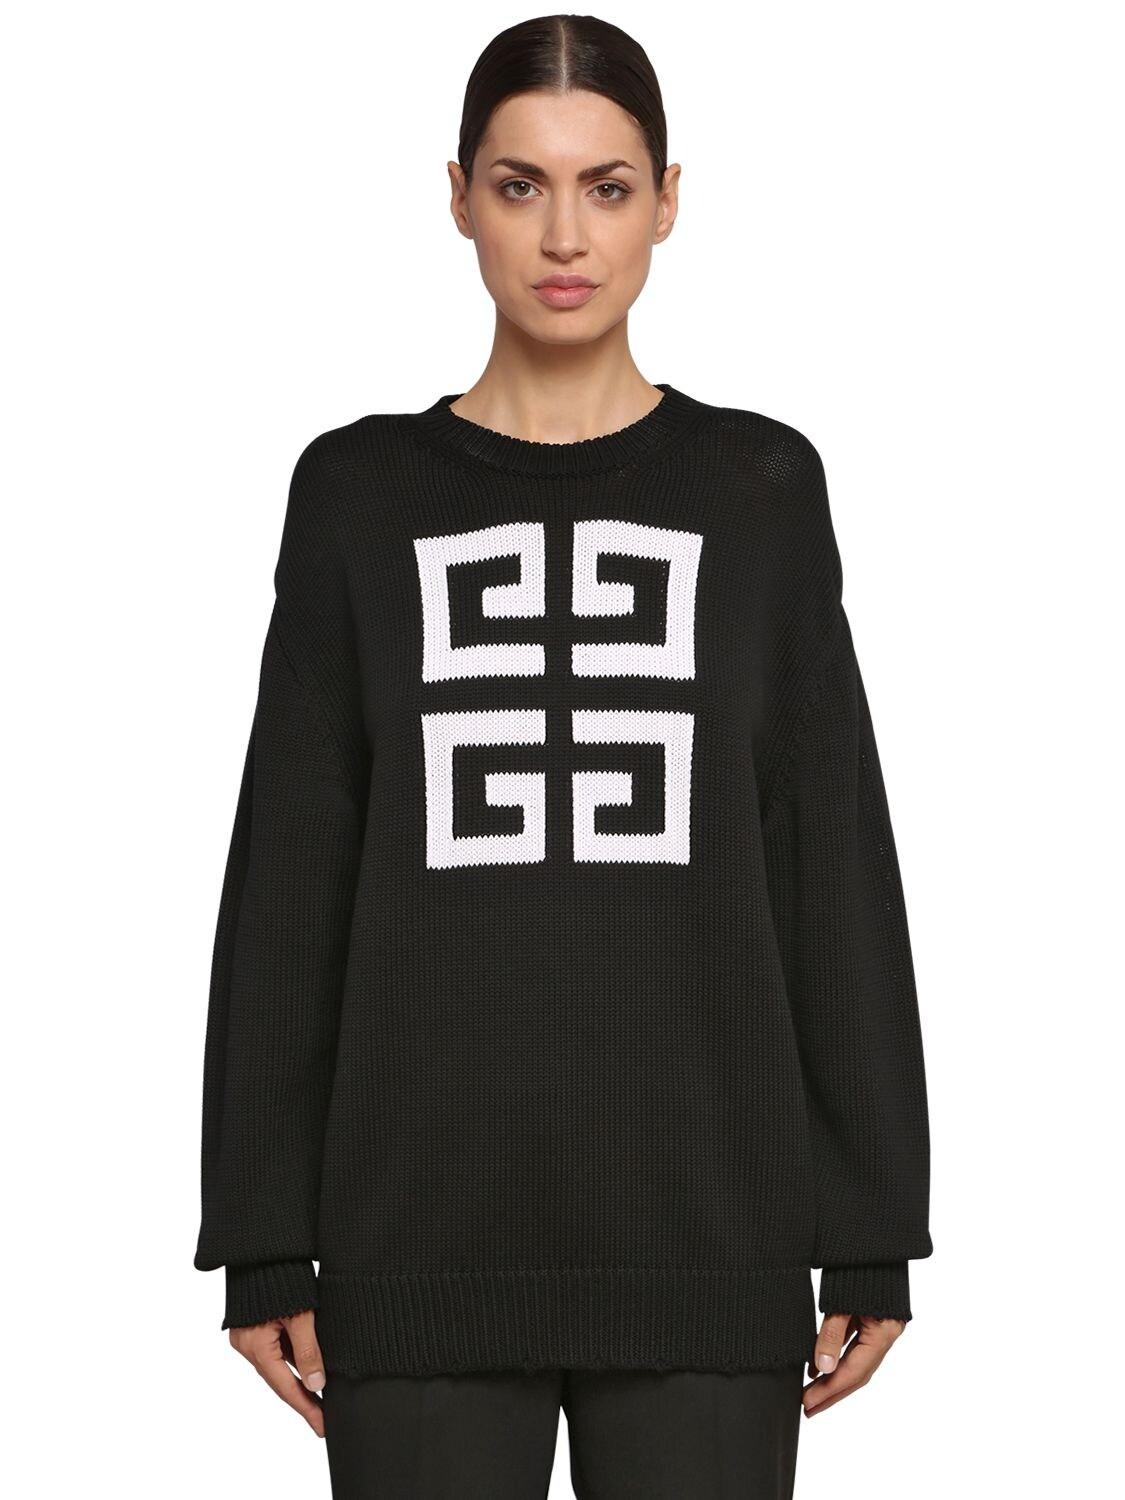 Givenchy Cotton Knitted Pattern Jumper in Black,White (Black) - Lyst